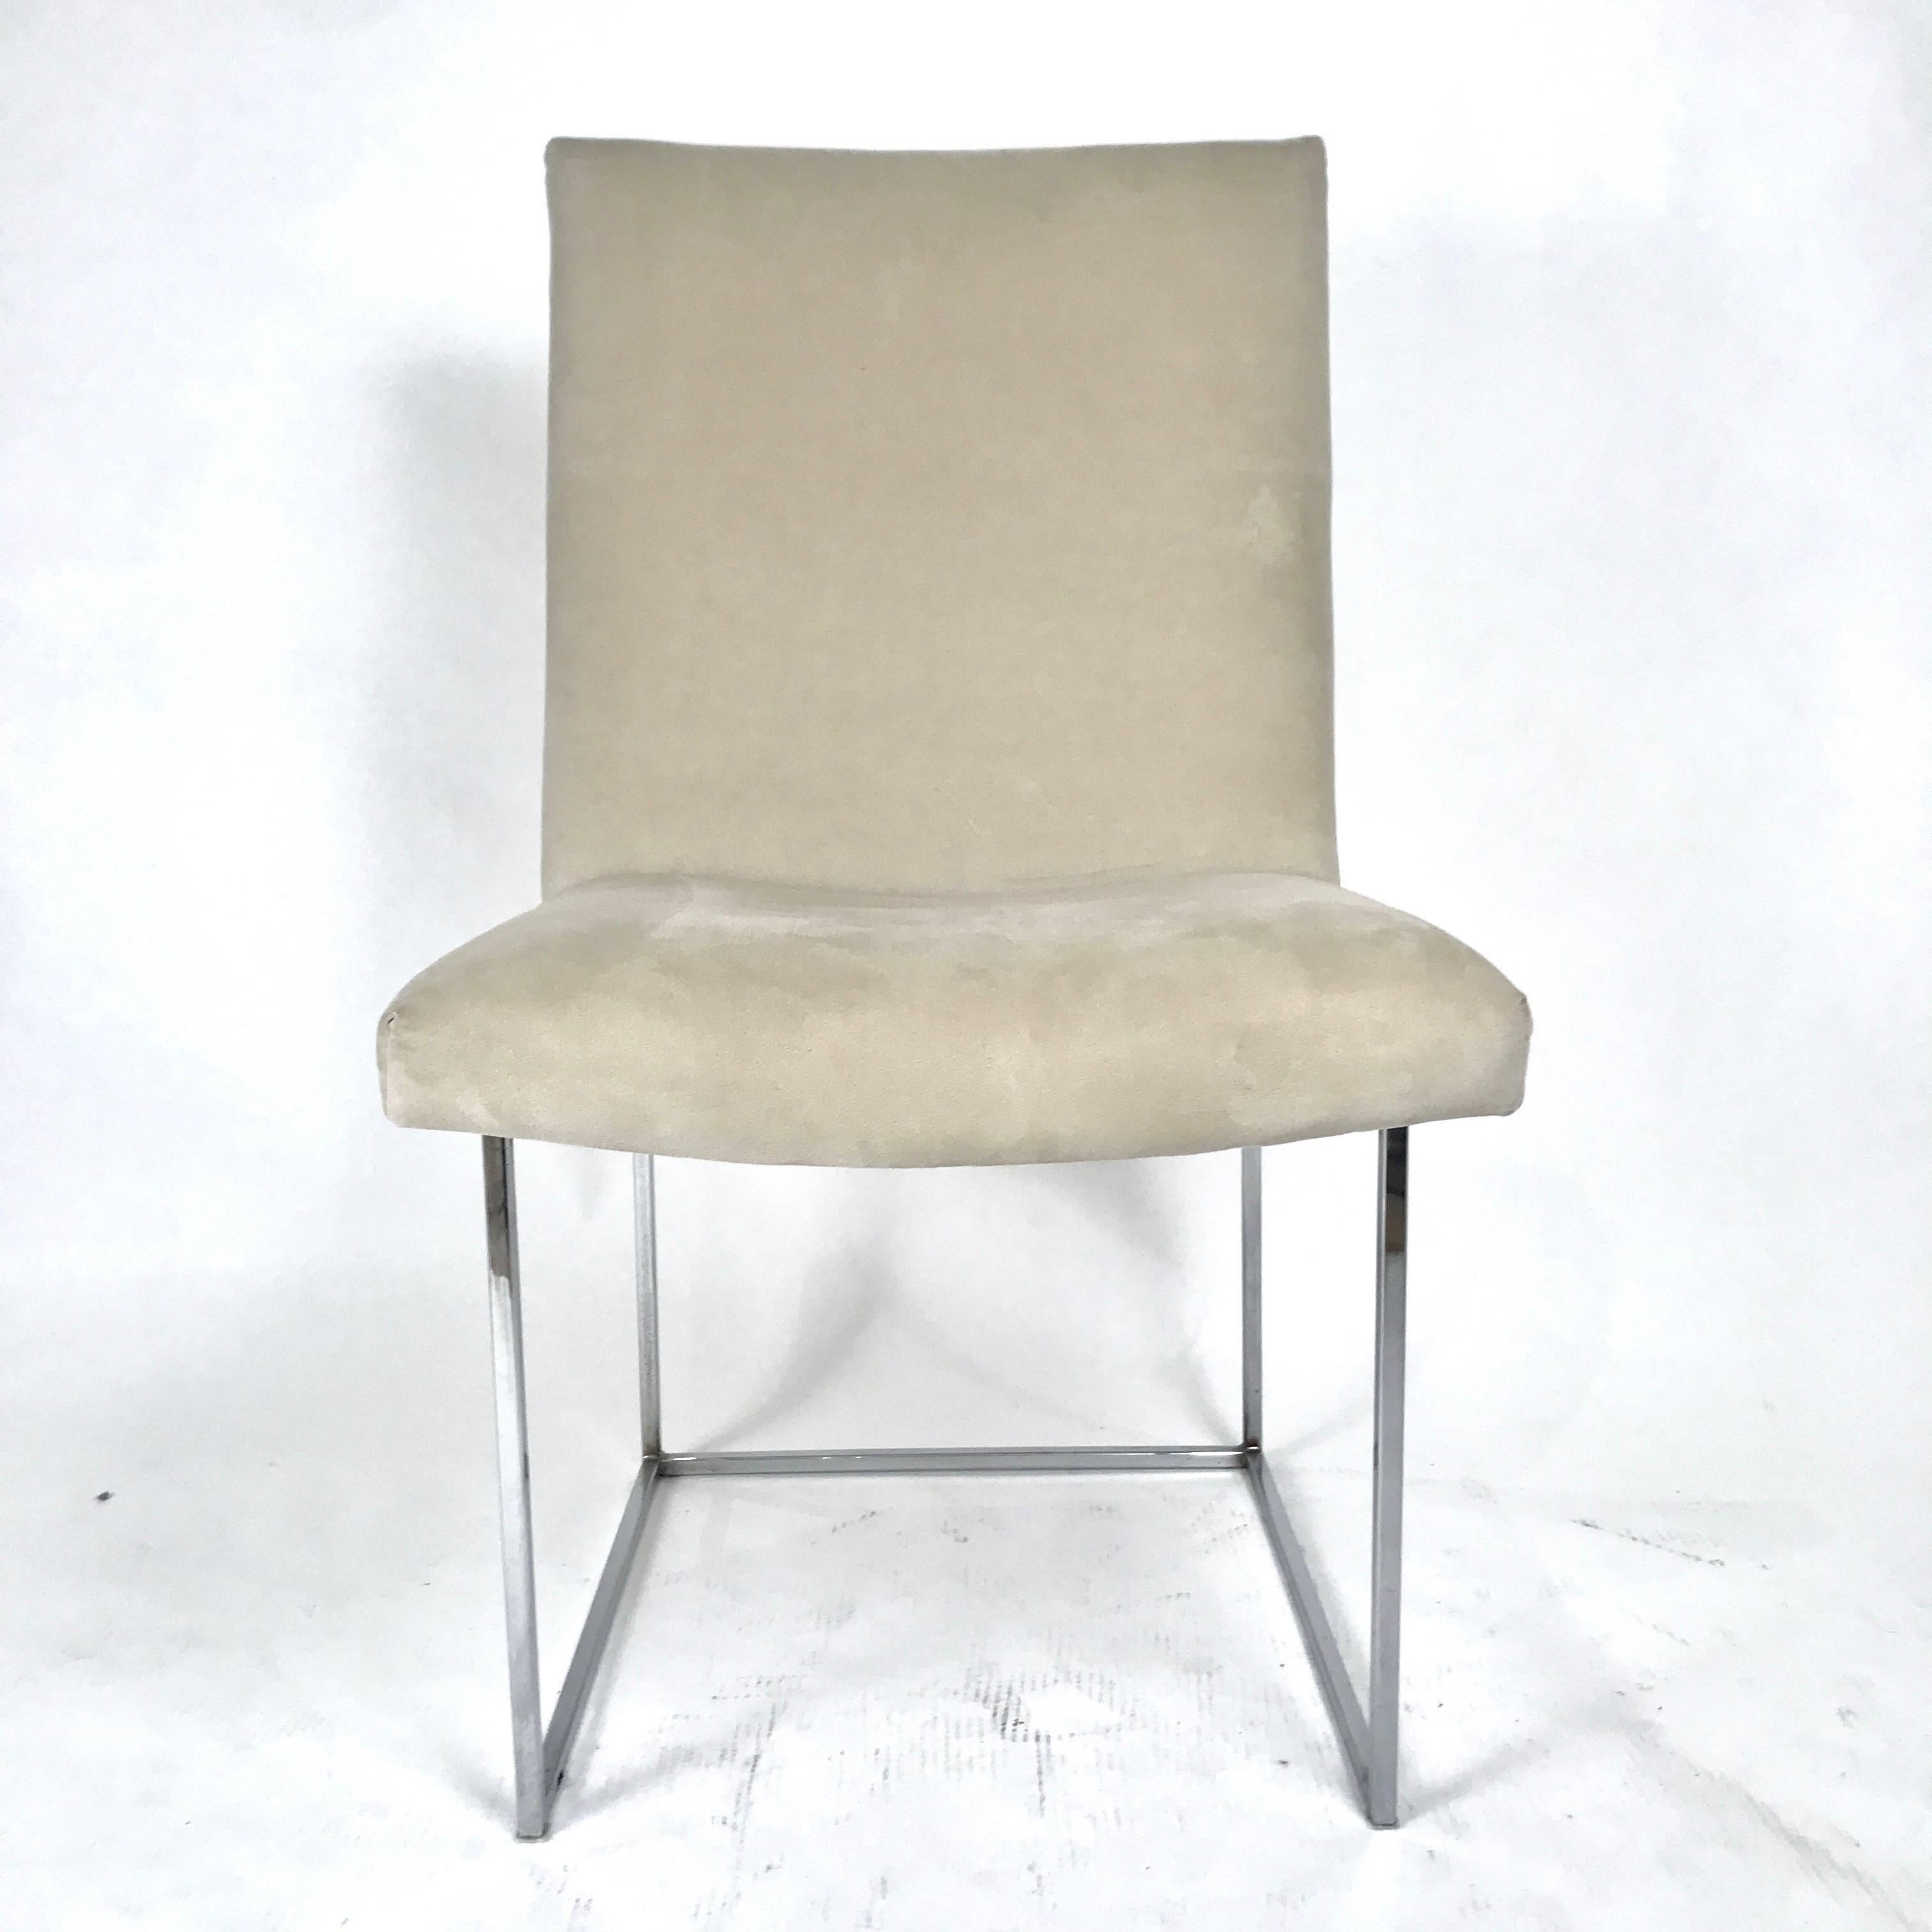 Mid-Century Modern Milo Baughman for Thayer Coggin Chrome Framed Dining Chairs with Ultrasuede